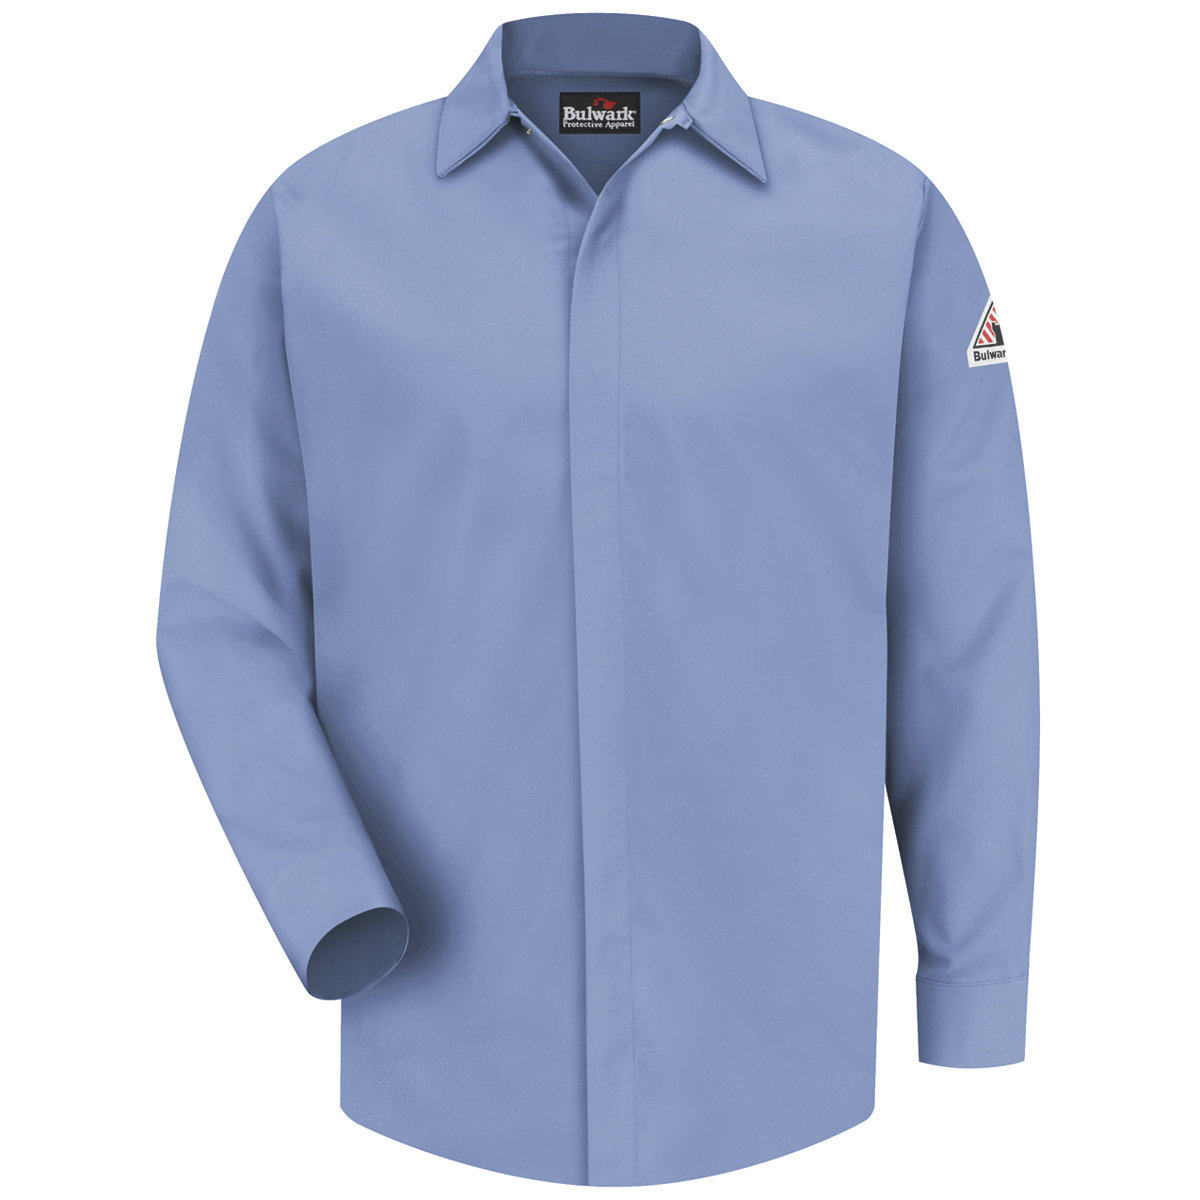 Bulwark® 2X Tall Light Blue Westex Ultrasoft®/Cotton/Nylon Flame Resistant Work Shirt With Gripper Front Closure